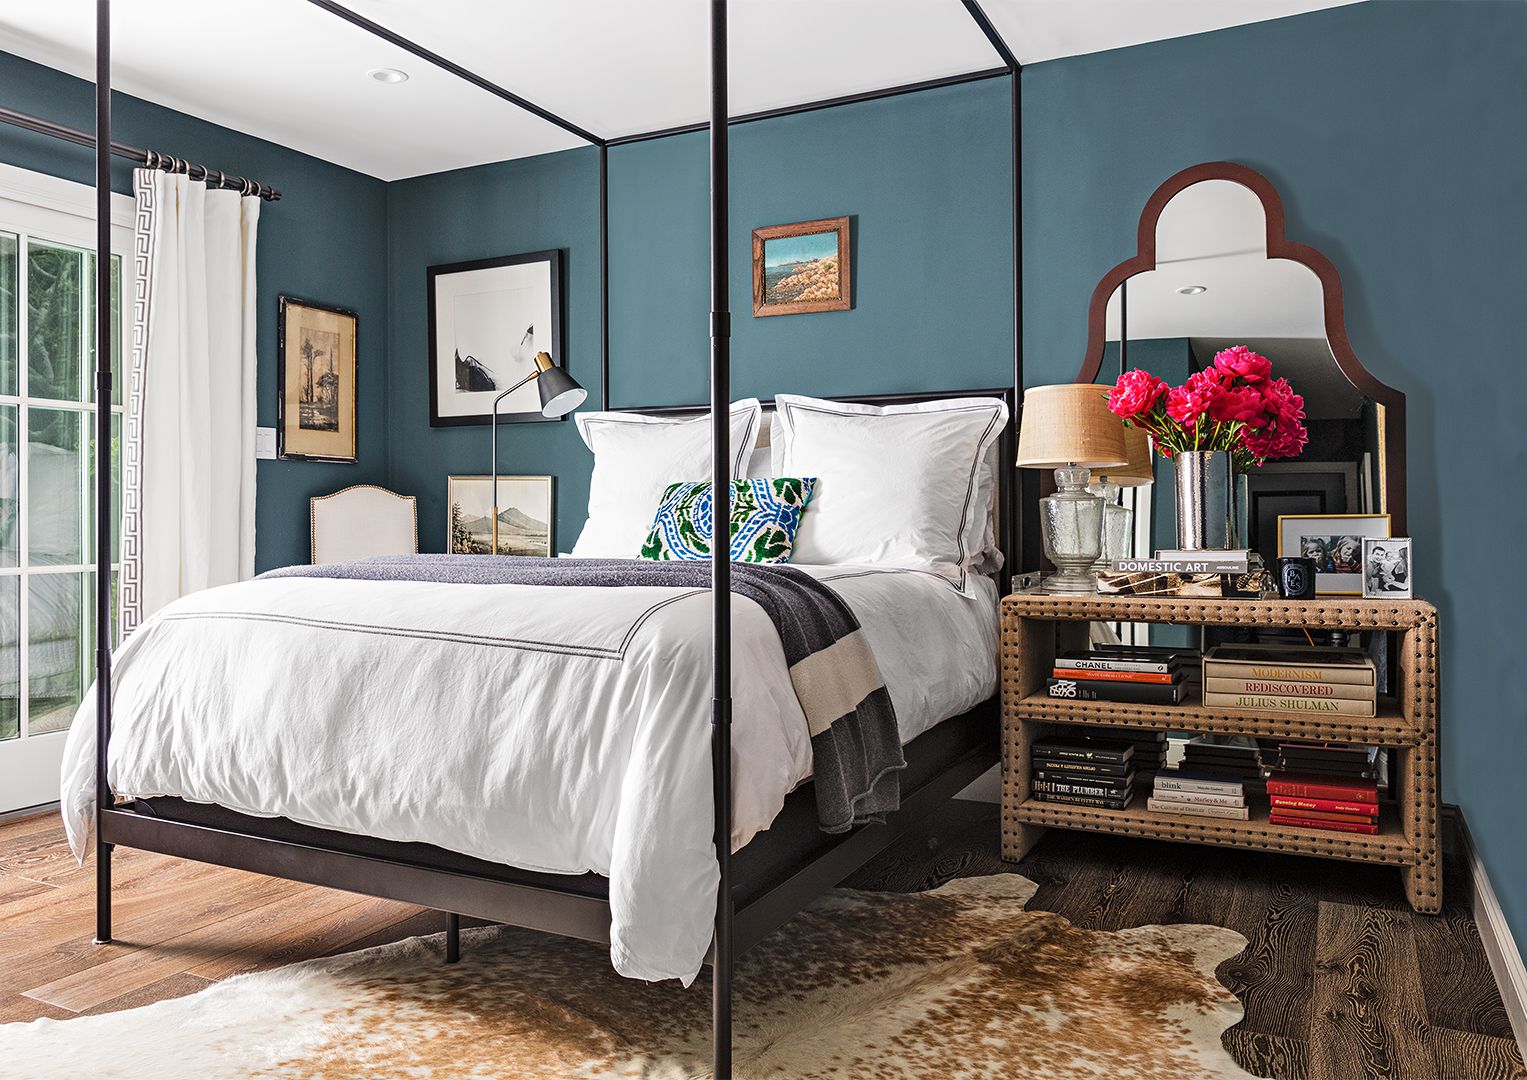 Choose these calming colors for small rooms